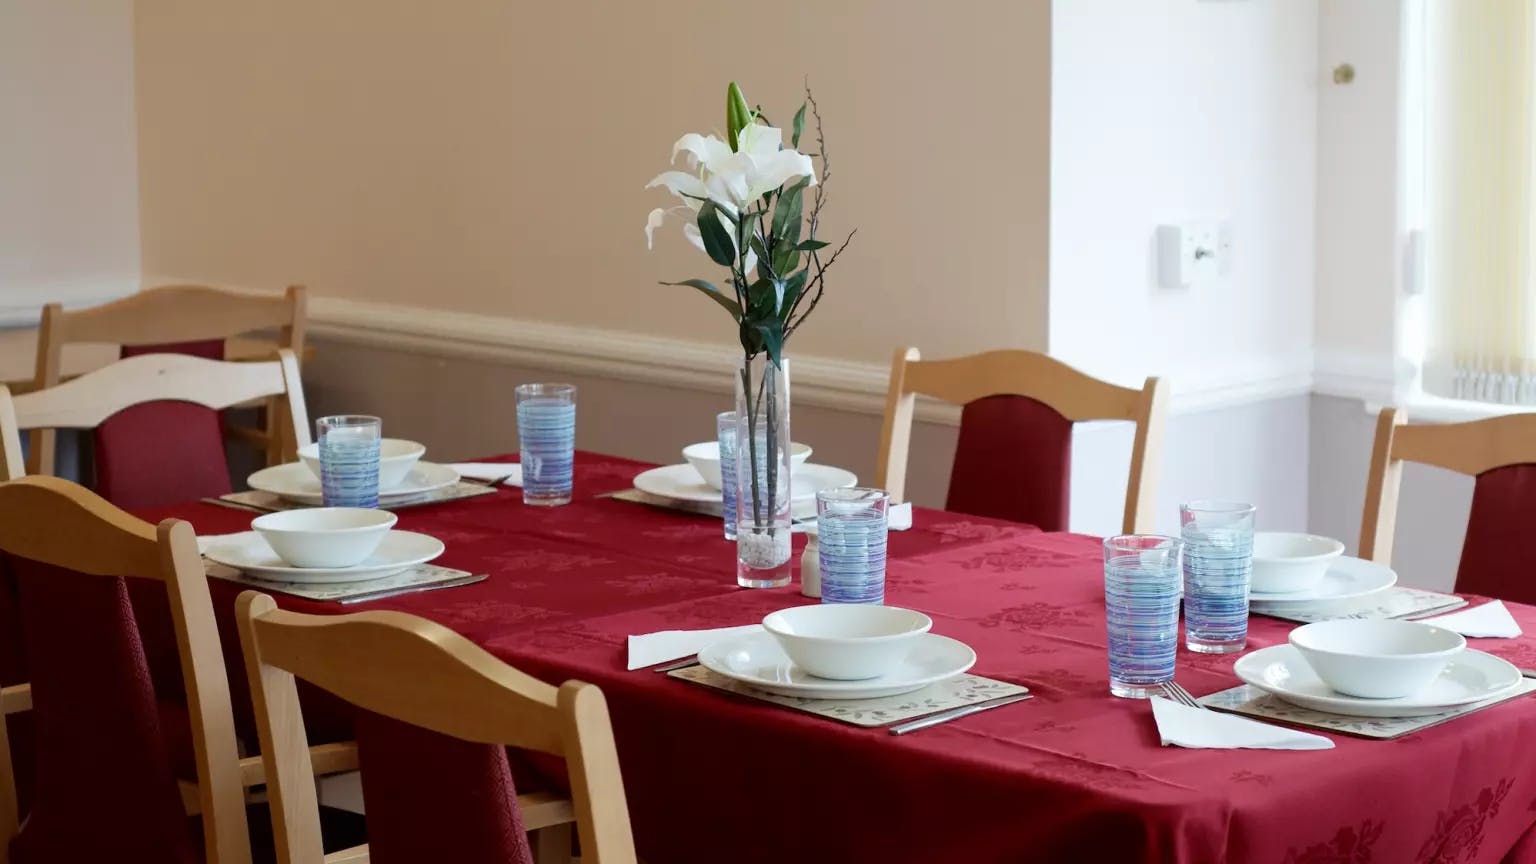 Dining area of Mayfair Lodge care home in Watkins Rise, Hertfordshire